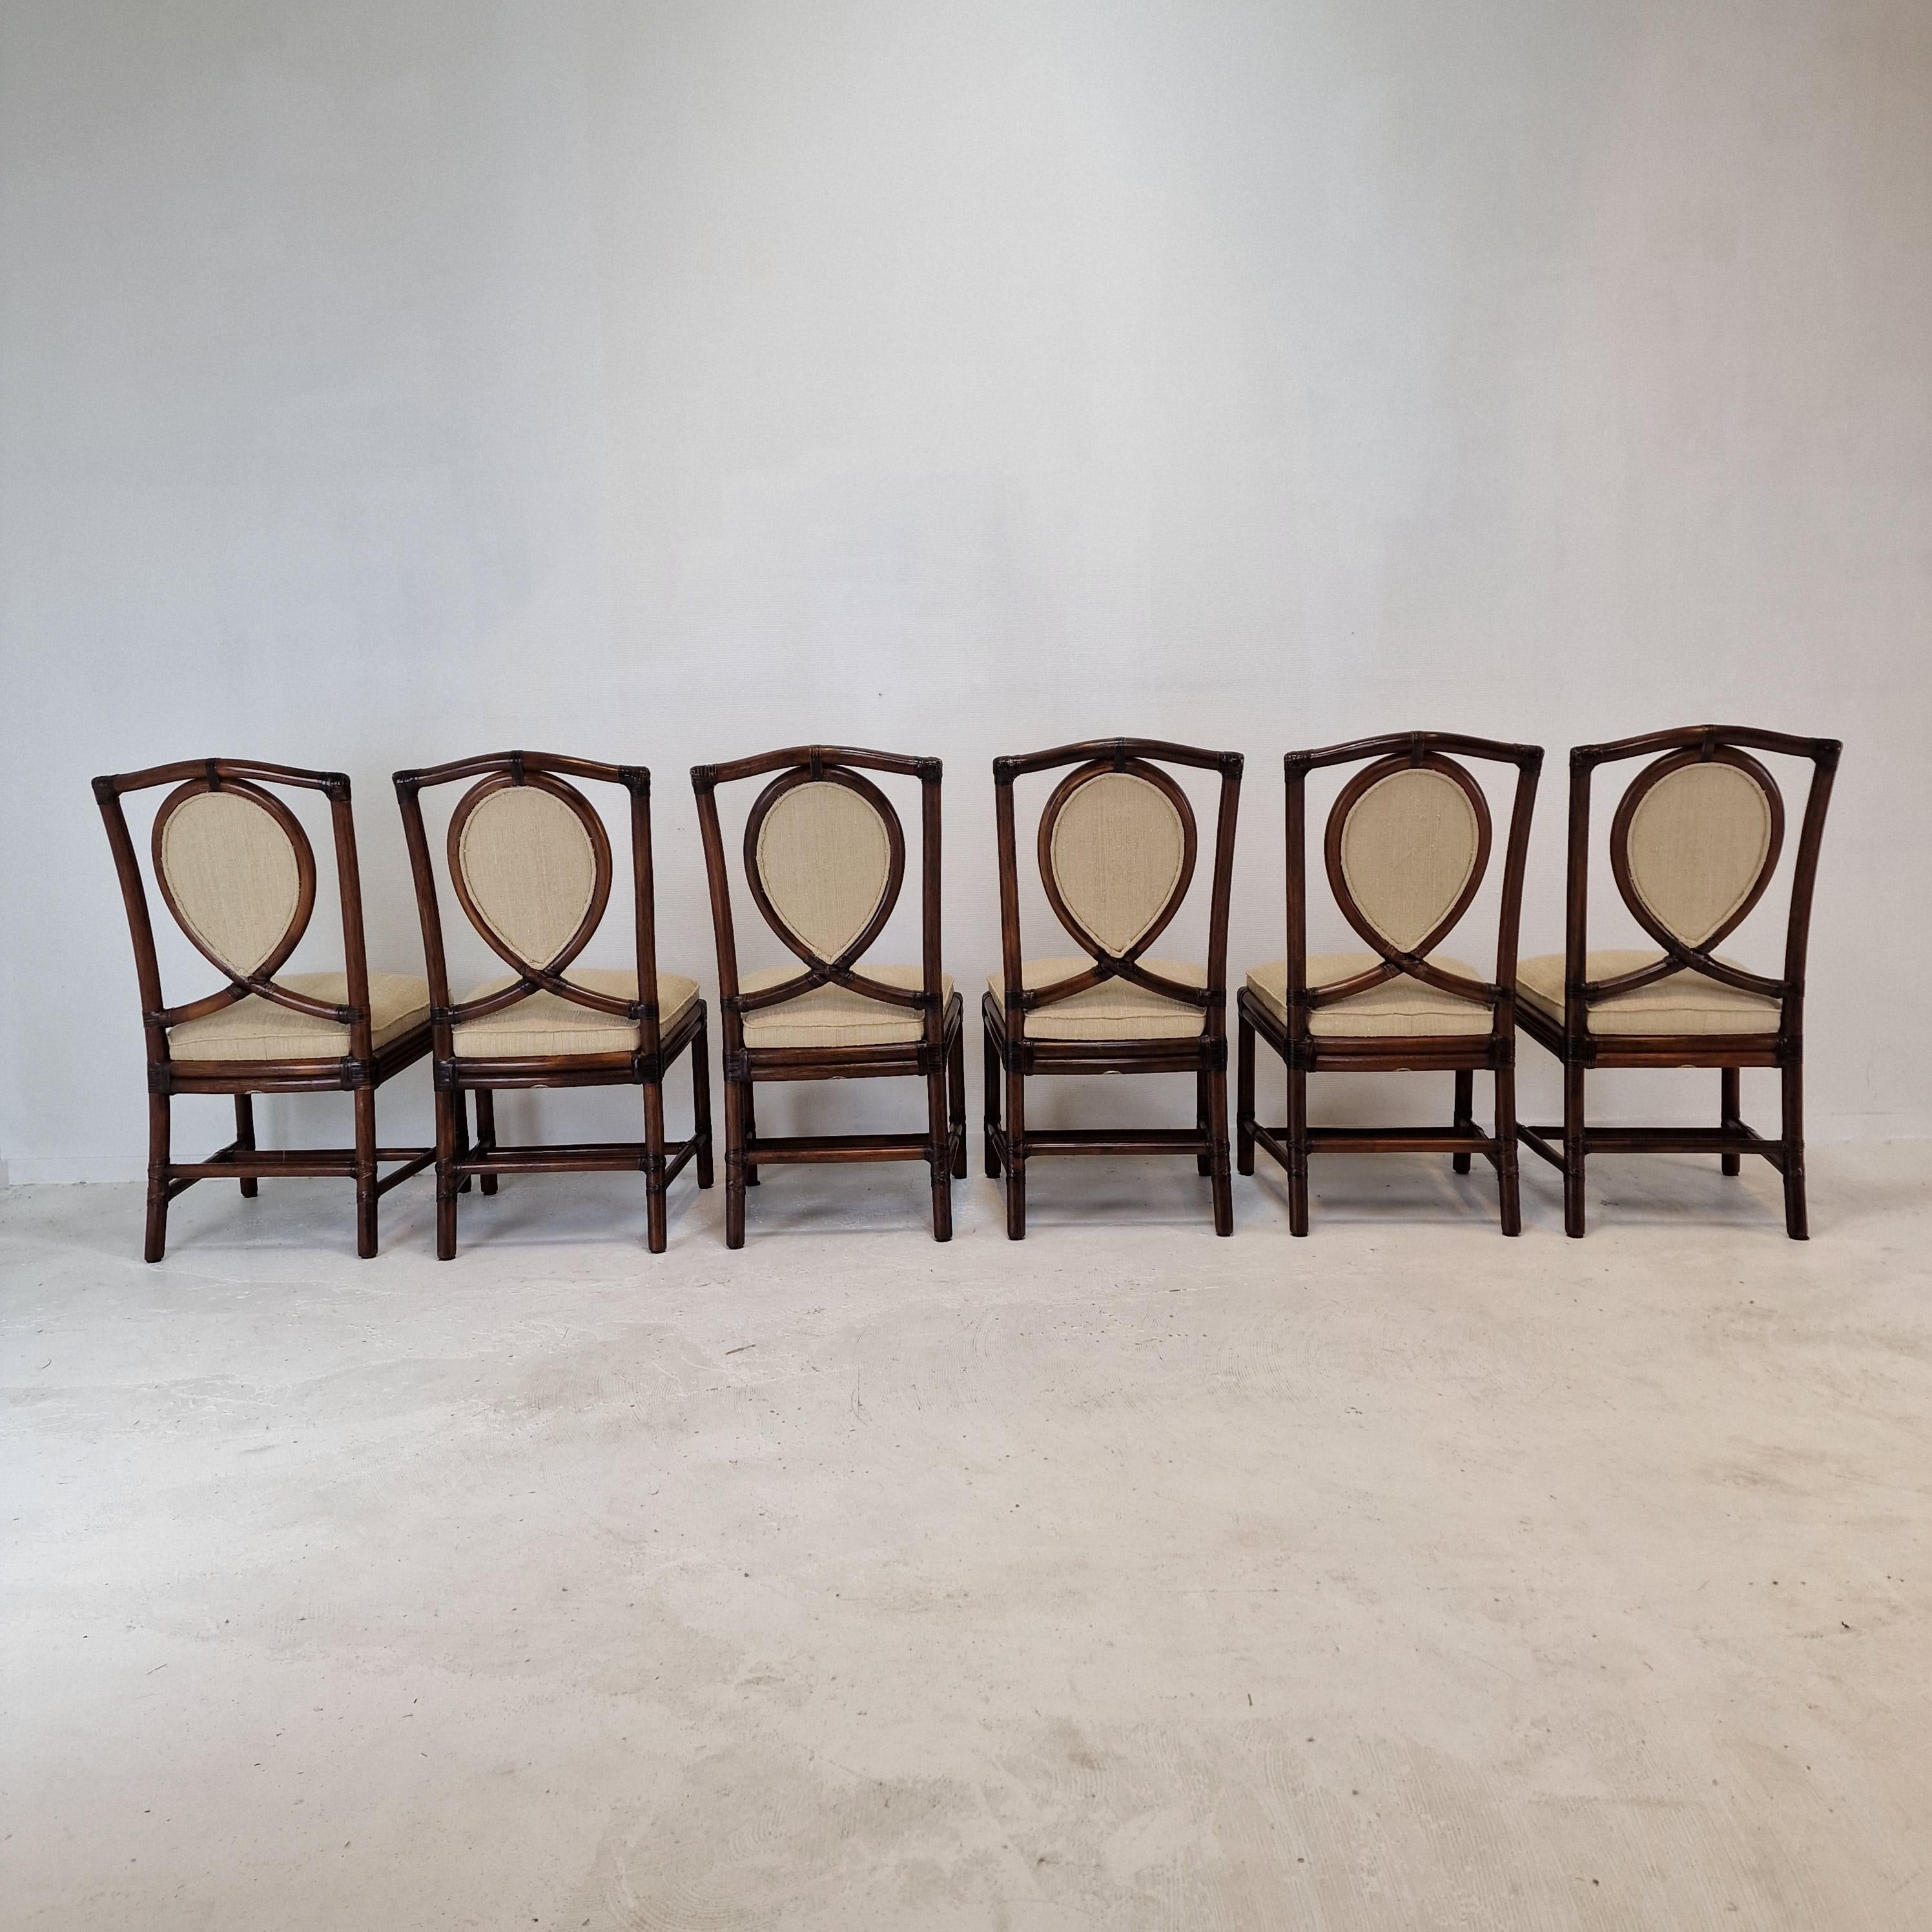 Set of 6 Bamboo Dining Chairs from Gasparucci Italo, 1970s For Sale 11